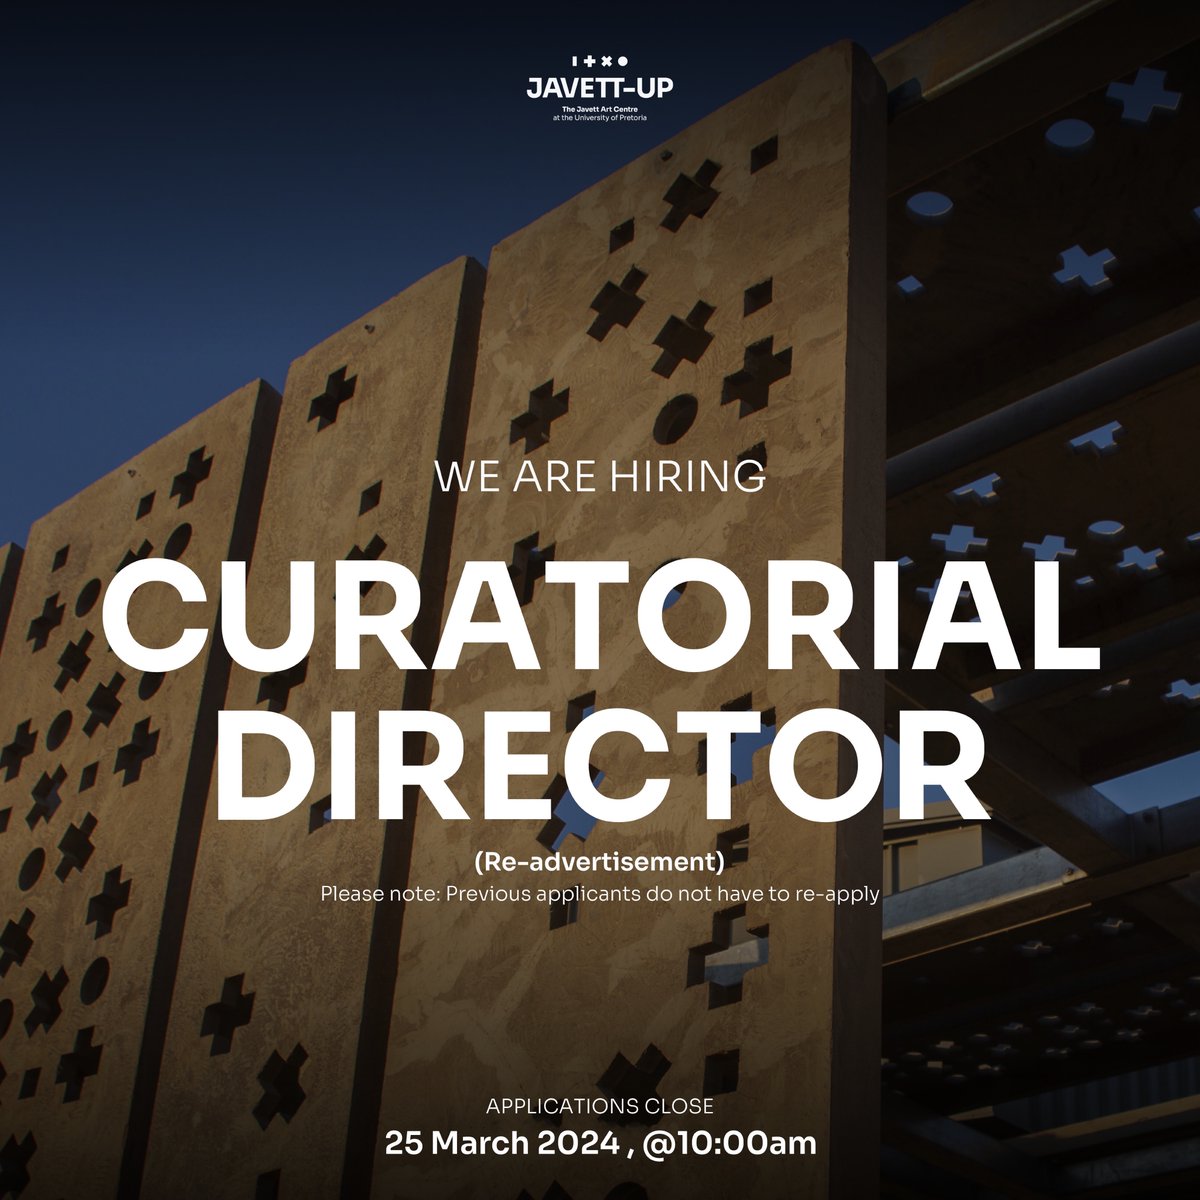 In our commitment to fostering inclusivity and ensuring a fair opportunity for all interested candidates, we are re-opening applications for the position of Curatorial Director. See link for more information bit.ly/3v4PJv8